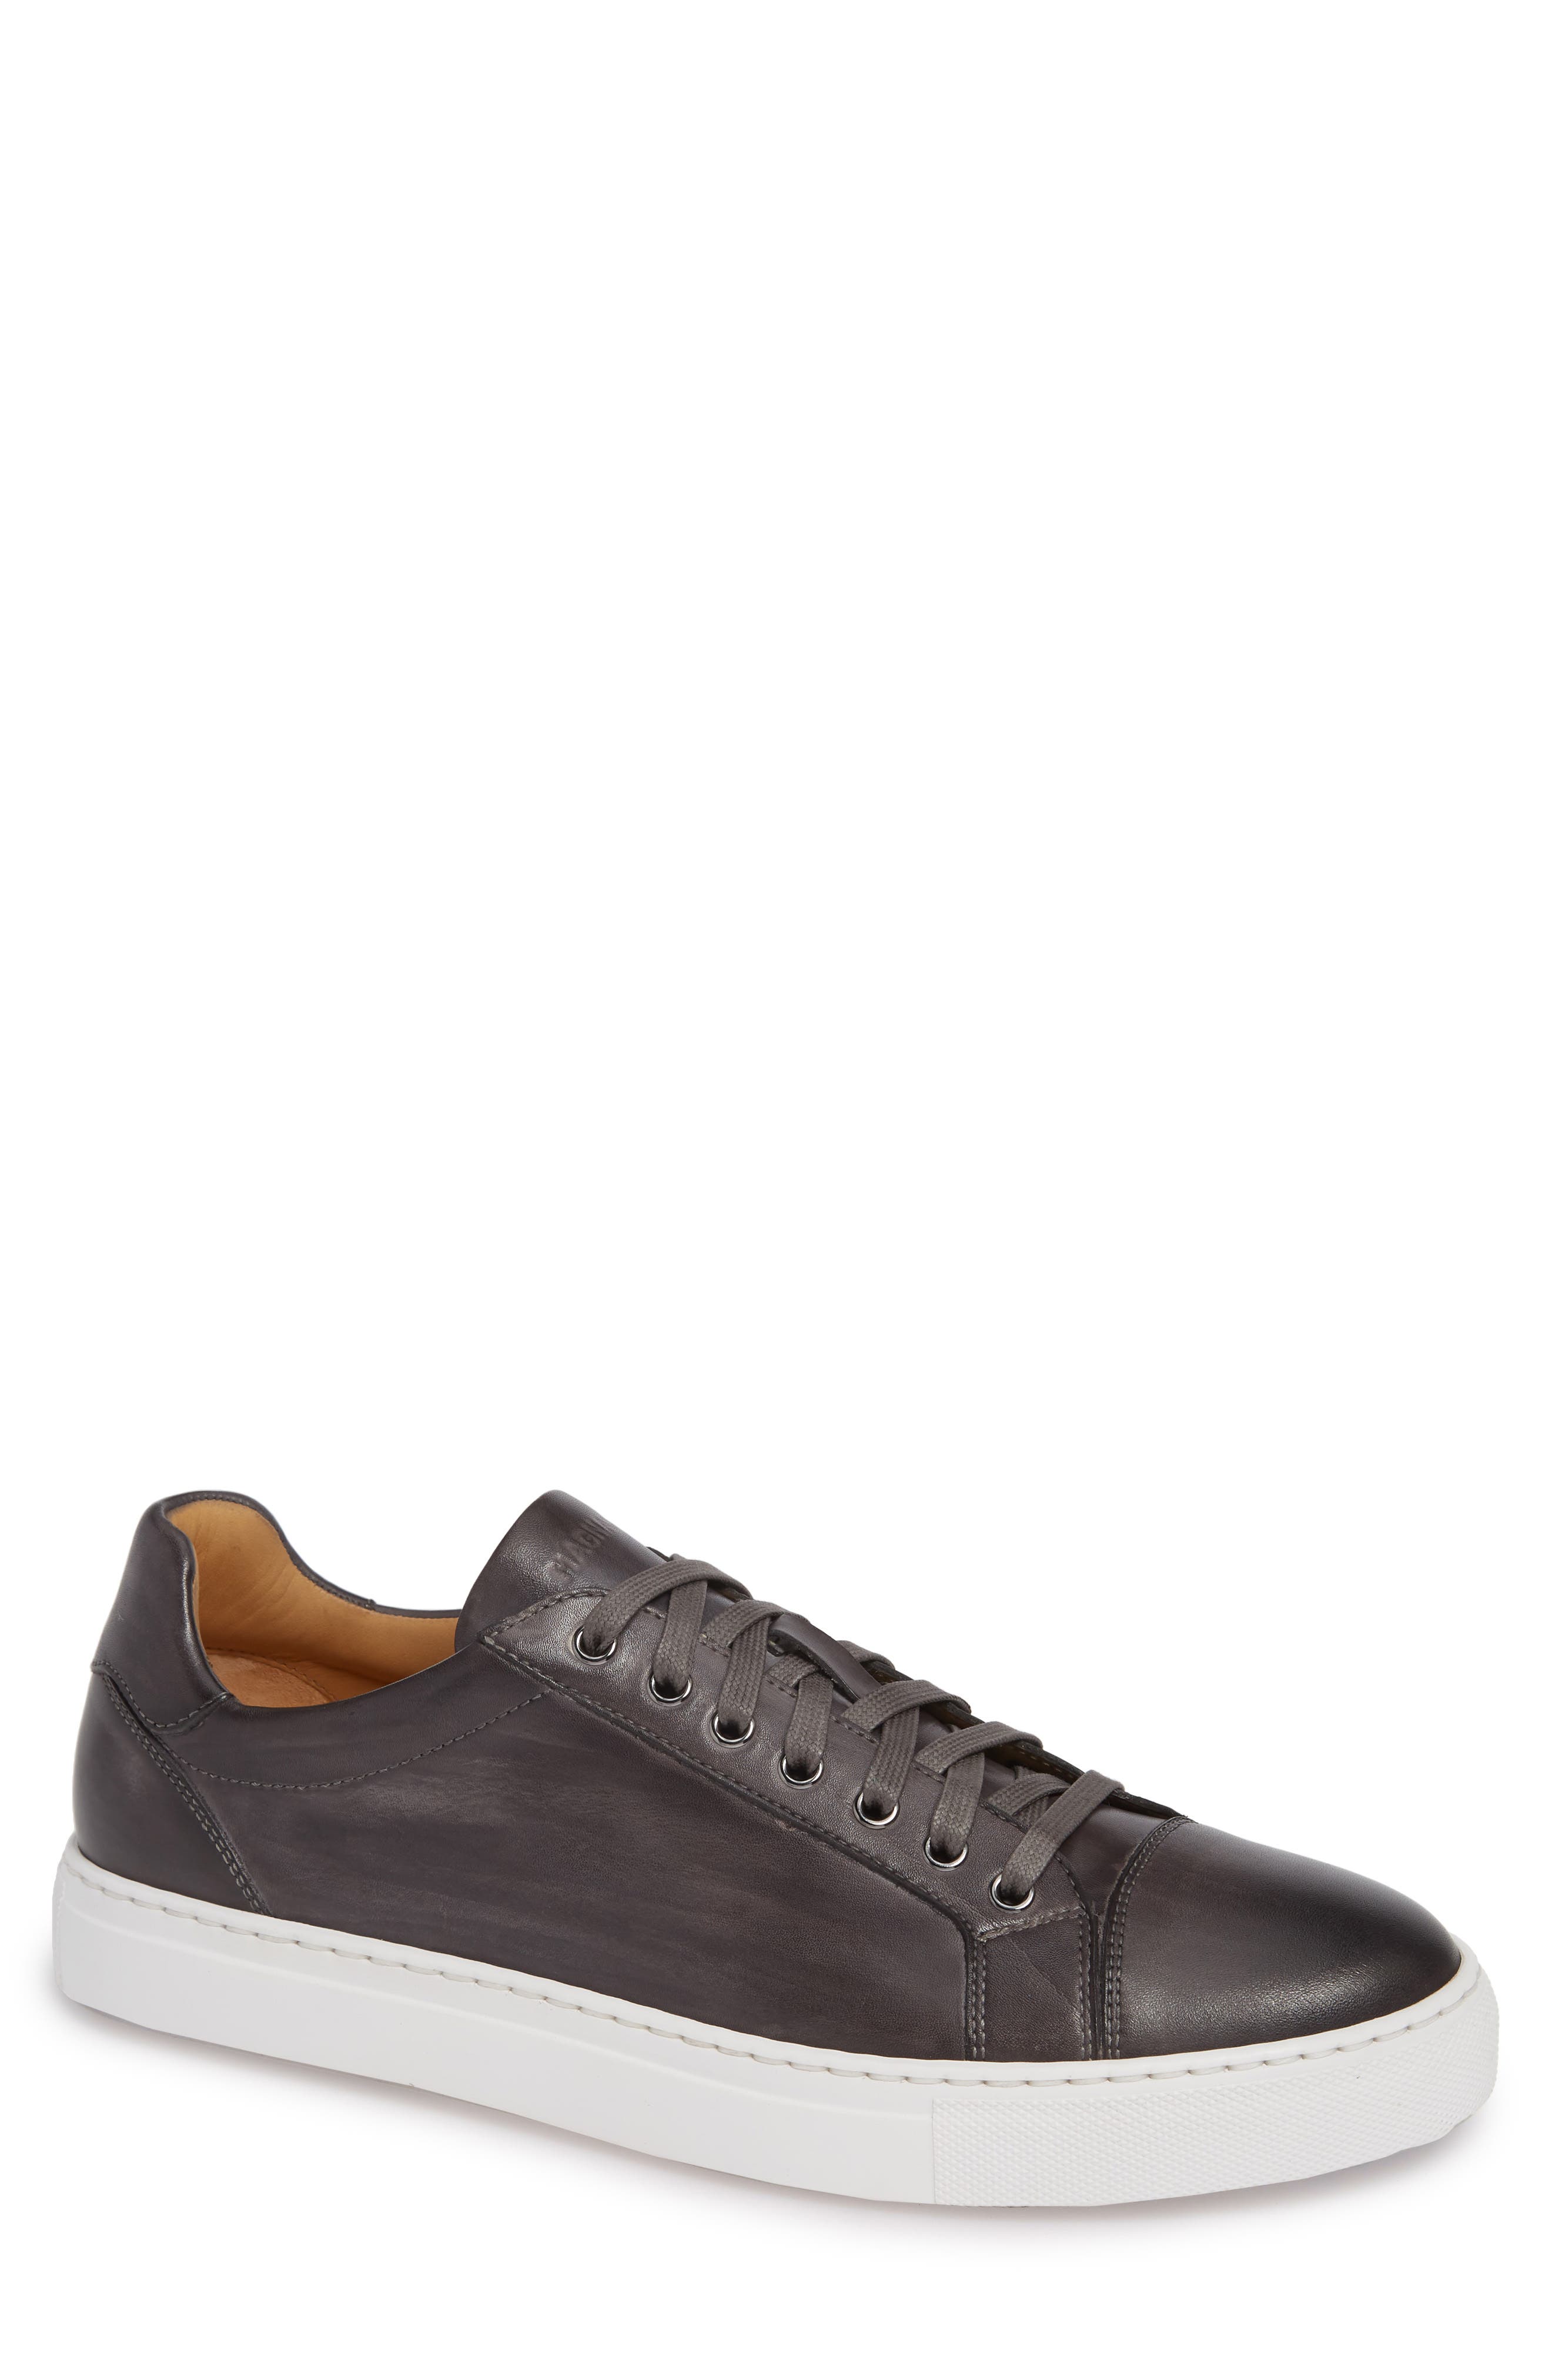 magnanni sneakers sale